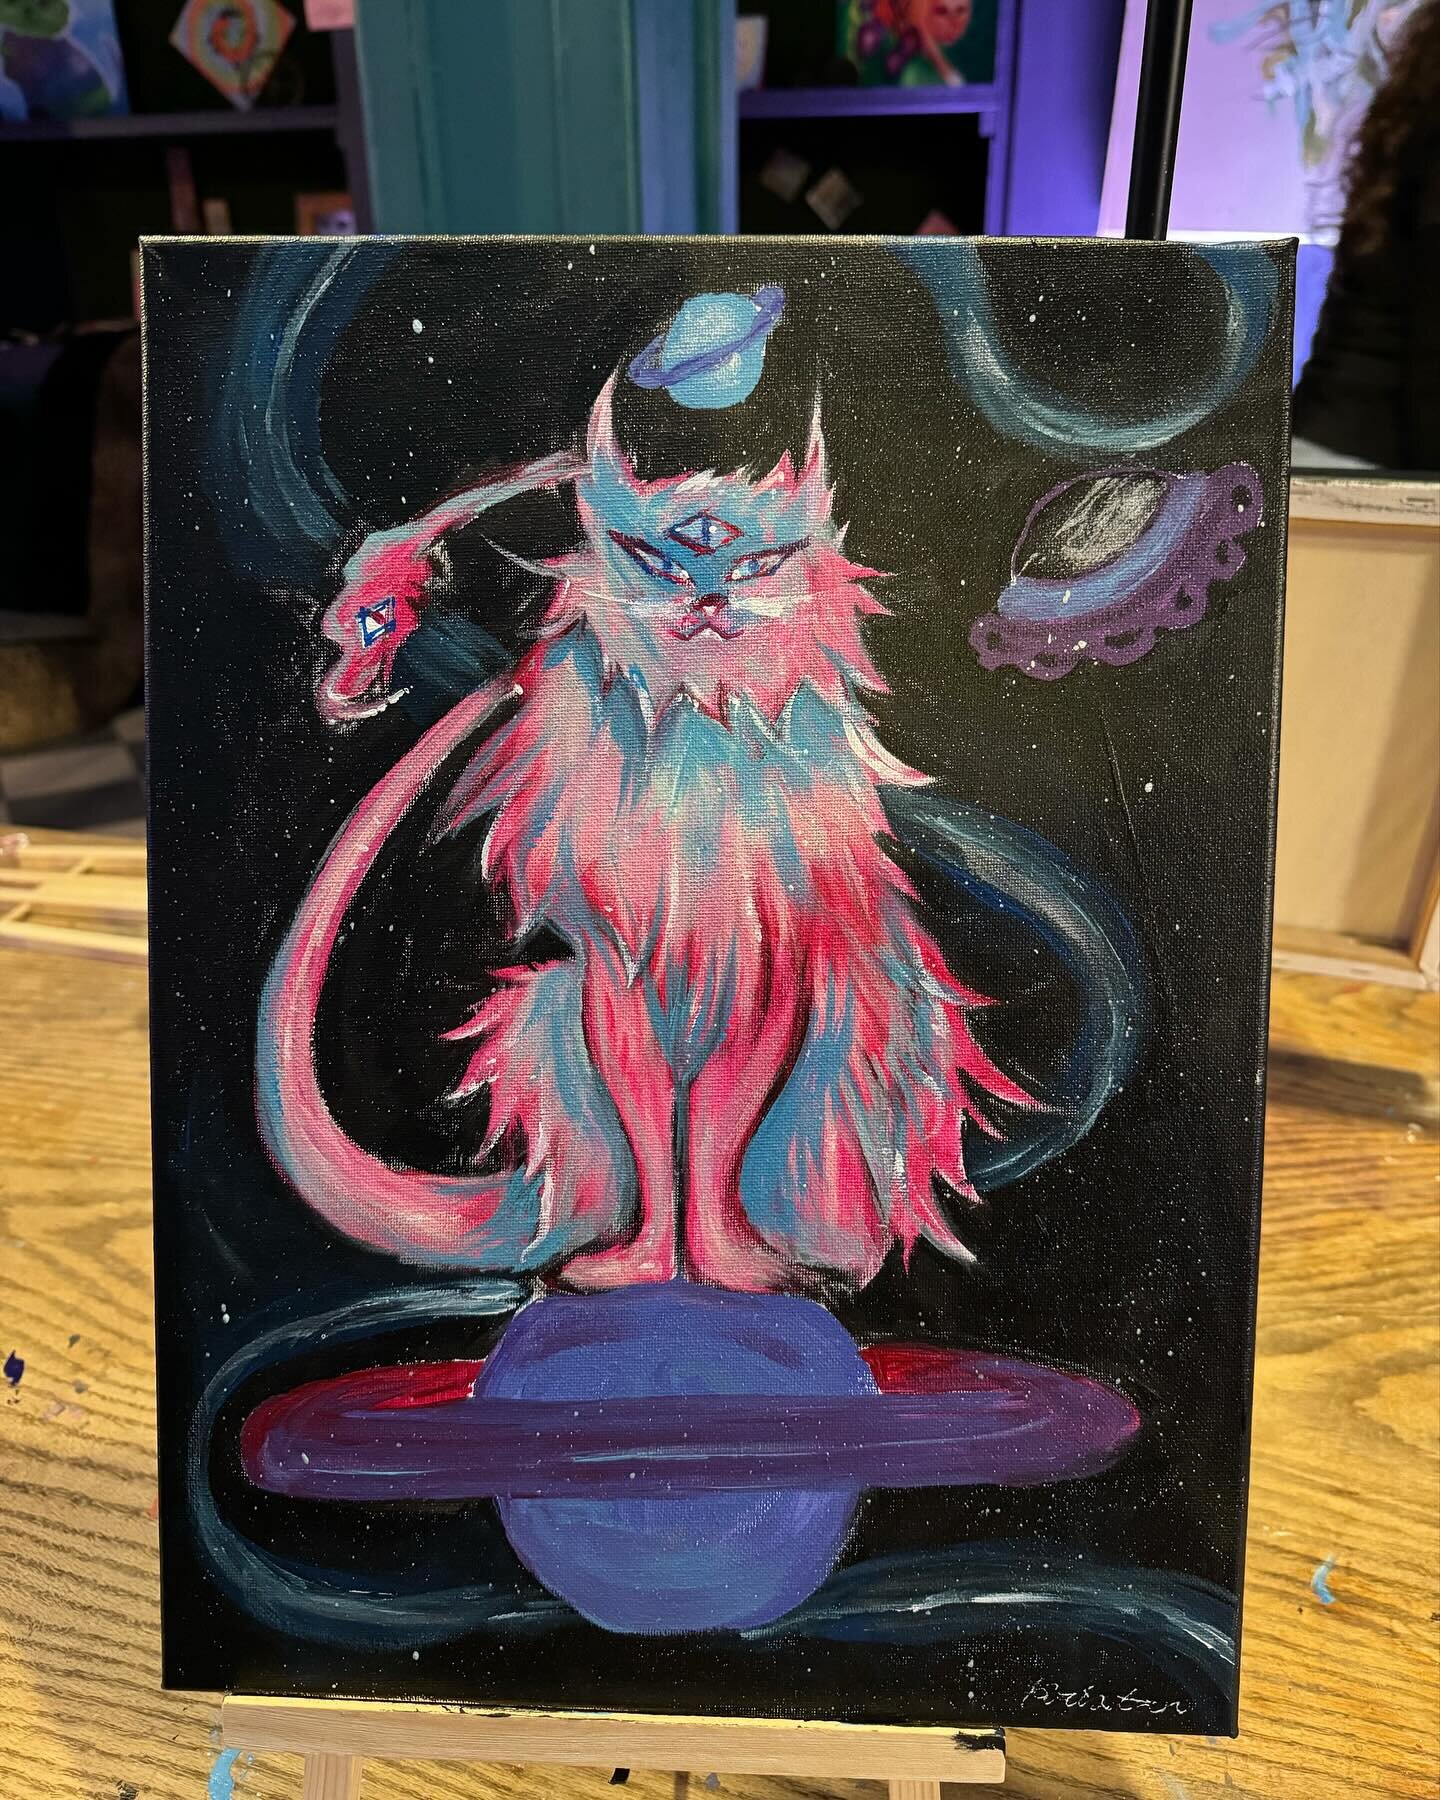 WEDNESDAY @ 8PM is our next painting class with @tylercardale 

This is the second to last chance to paint your own Cosmic Cat! 

Spots are filling up fast! 

BOOK NOW 🎨🖌️😼 Link in bio! 

#paintclass #paintandsip #art #culture